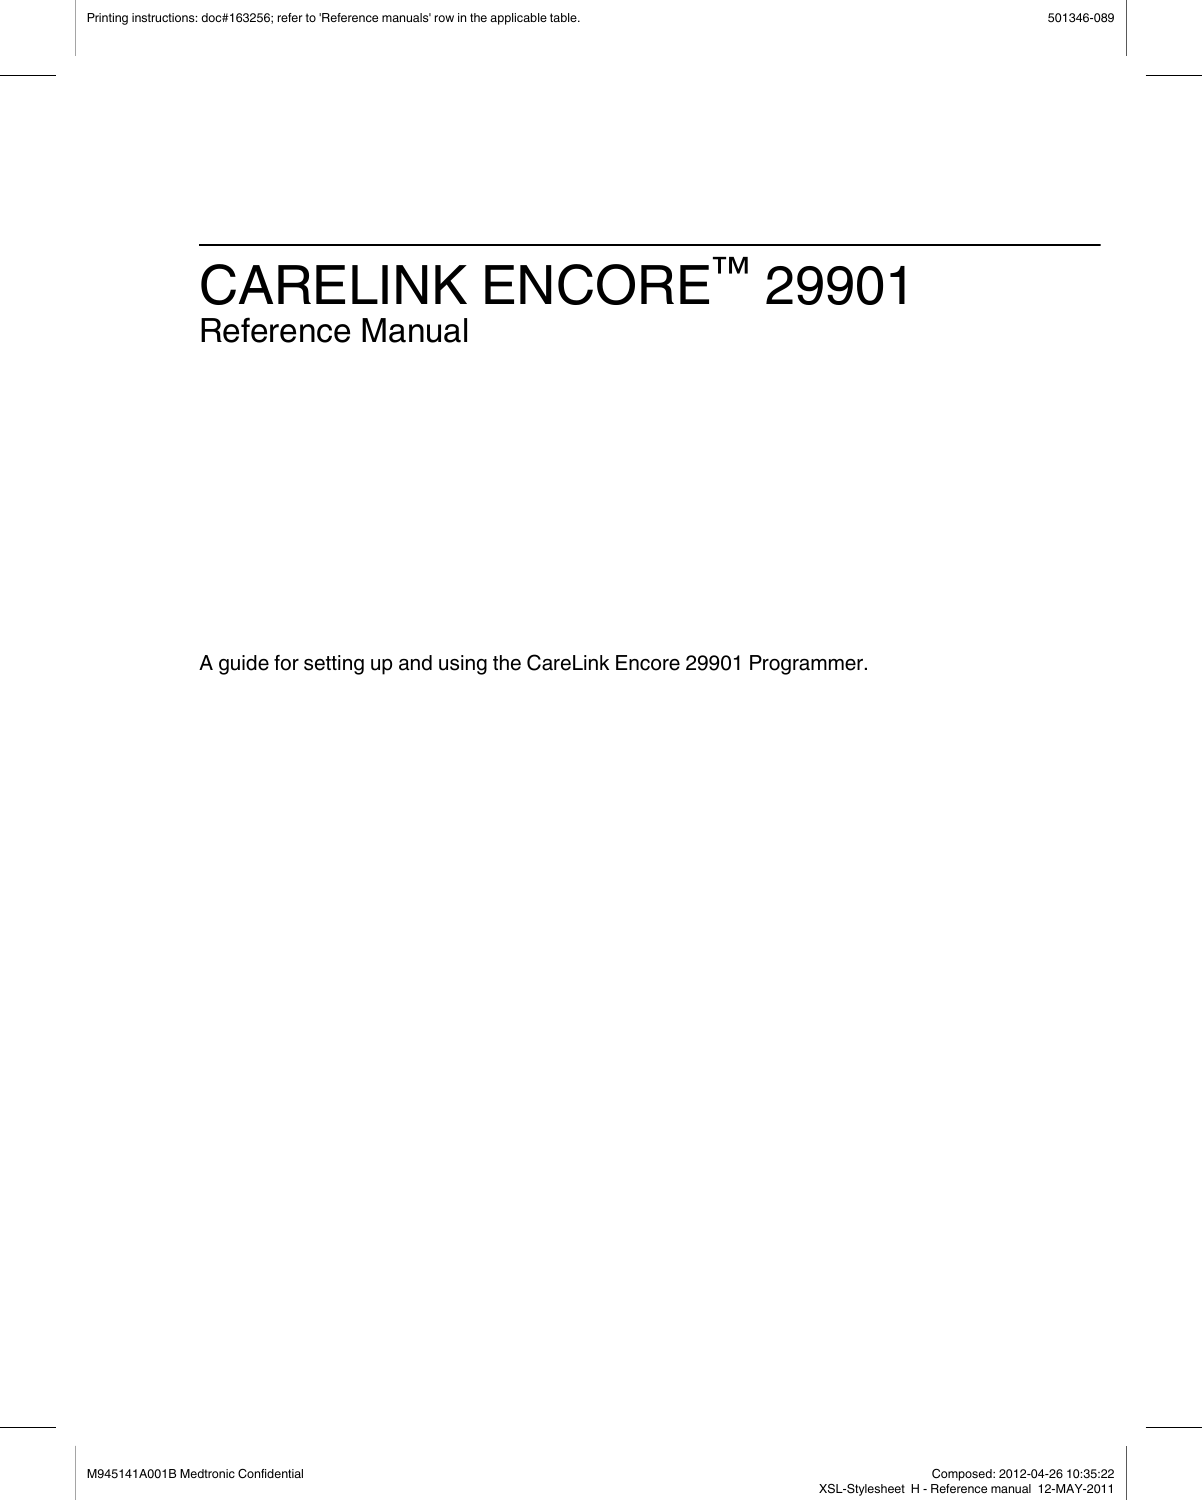 A guide for setting up and using the CareLink Encore 29901 Programmer.Printing instructions: doc#163256; refer to &apos;Reference manuals&apos; row in the applicable table. 501346-089M945141A001B Medtronic Confidential   Composed: 2012-04-26 10:35:22XSL-Stylesheet  H - Reference manual  12-MAY-2011CARELINK ENCORE™ 29901Reference Manual